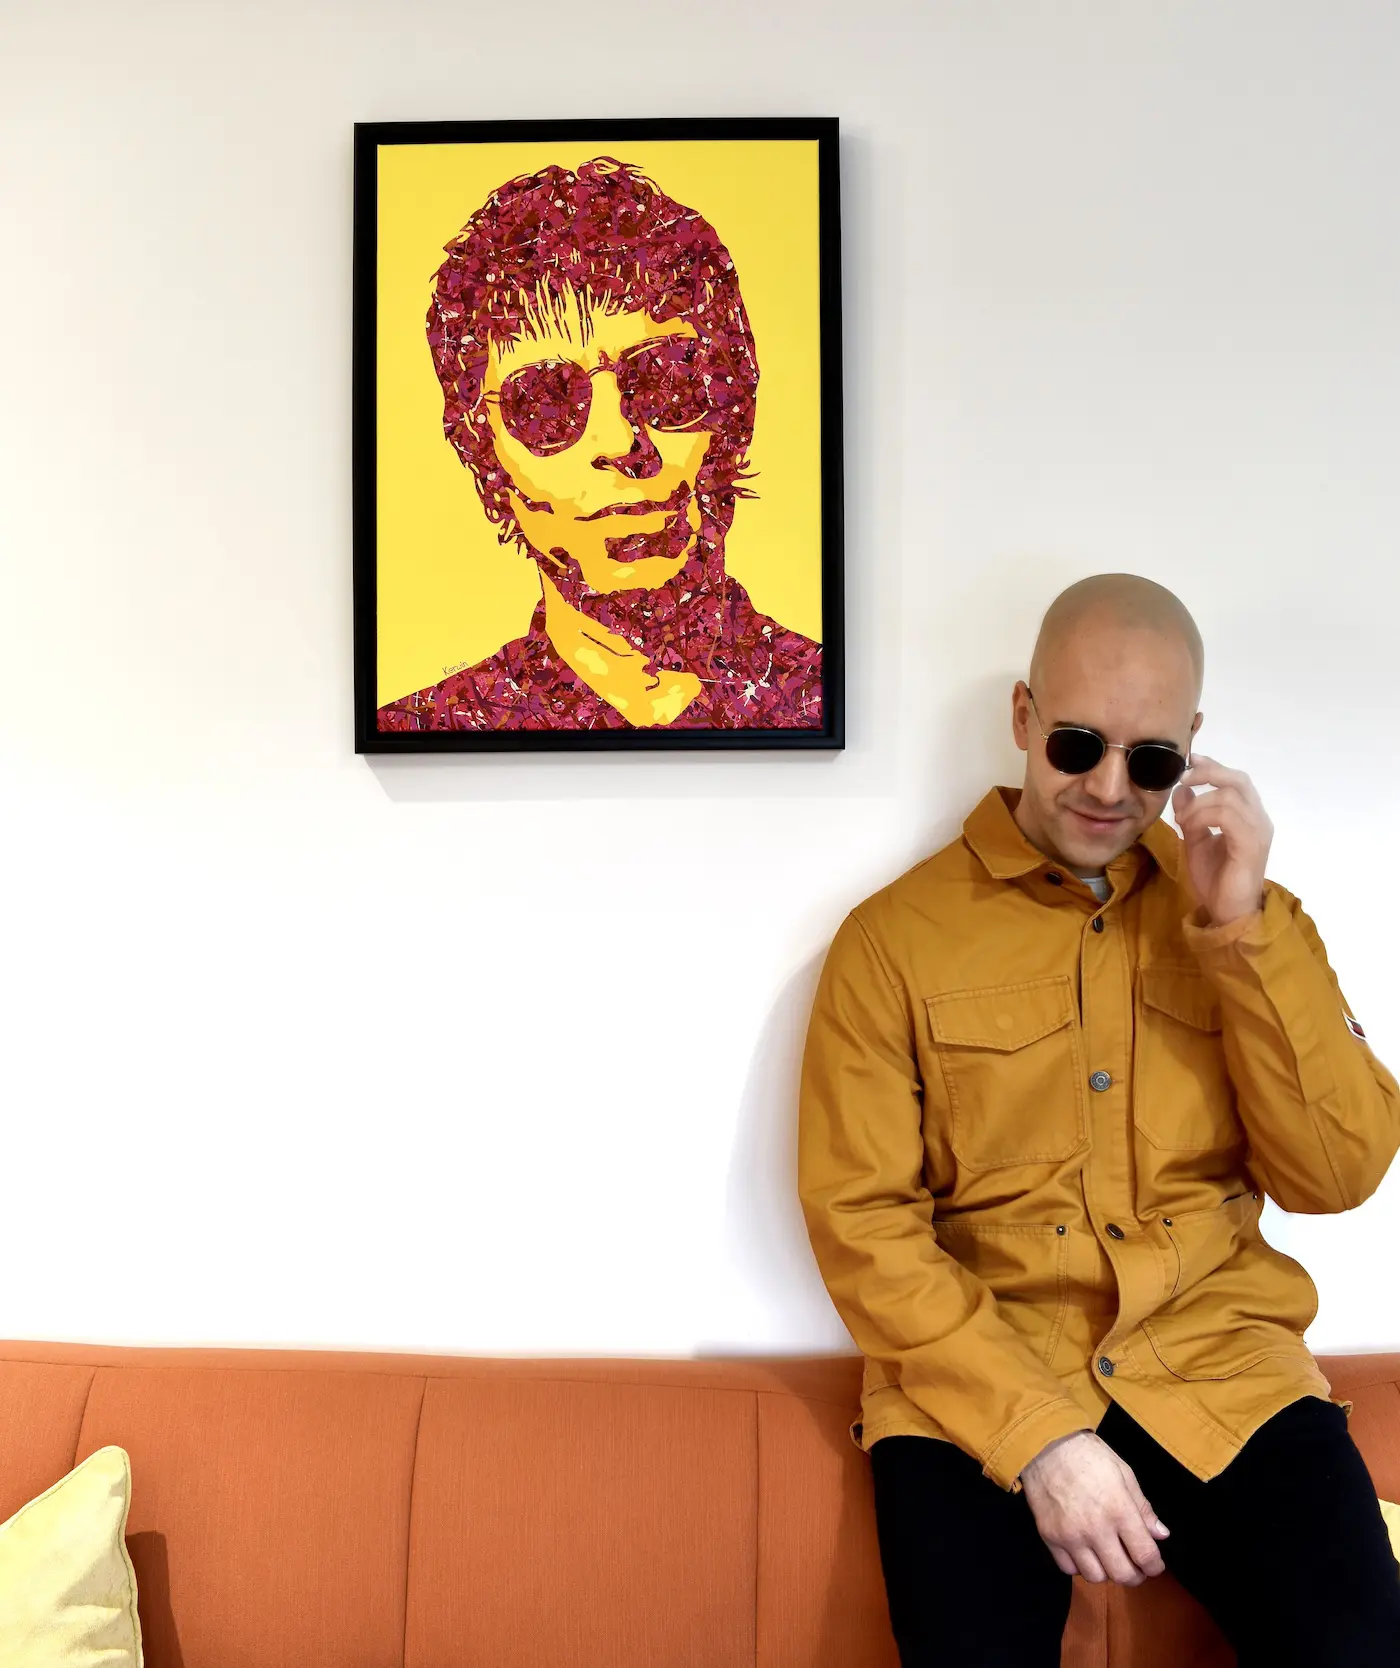 Liam Gallagher - Oasis music pop art painting and poster prints | By Kerwin